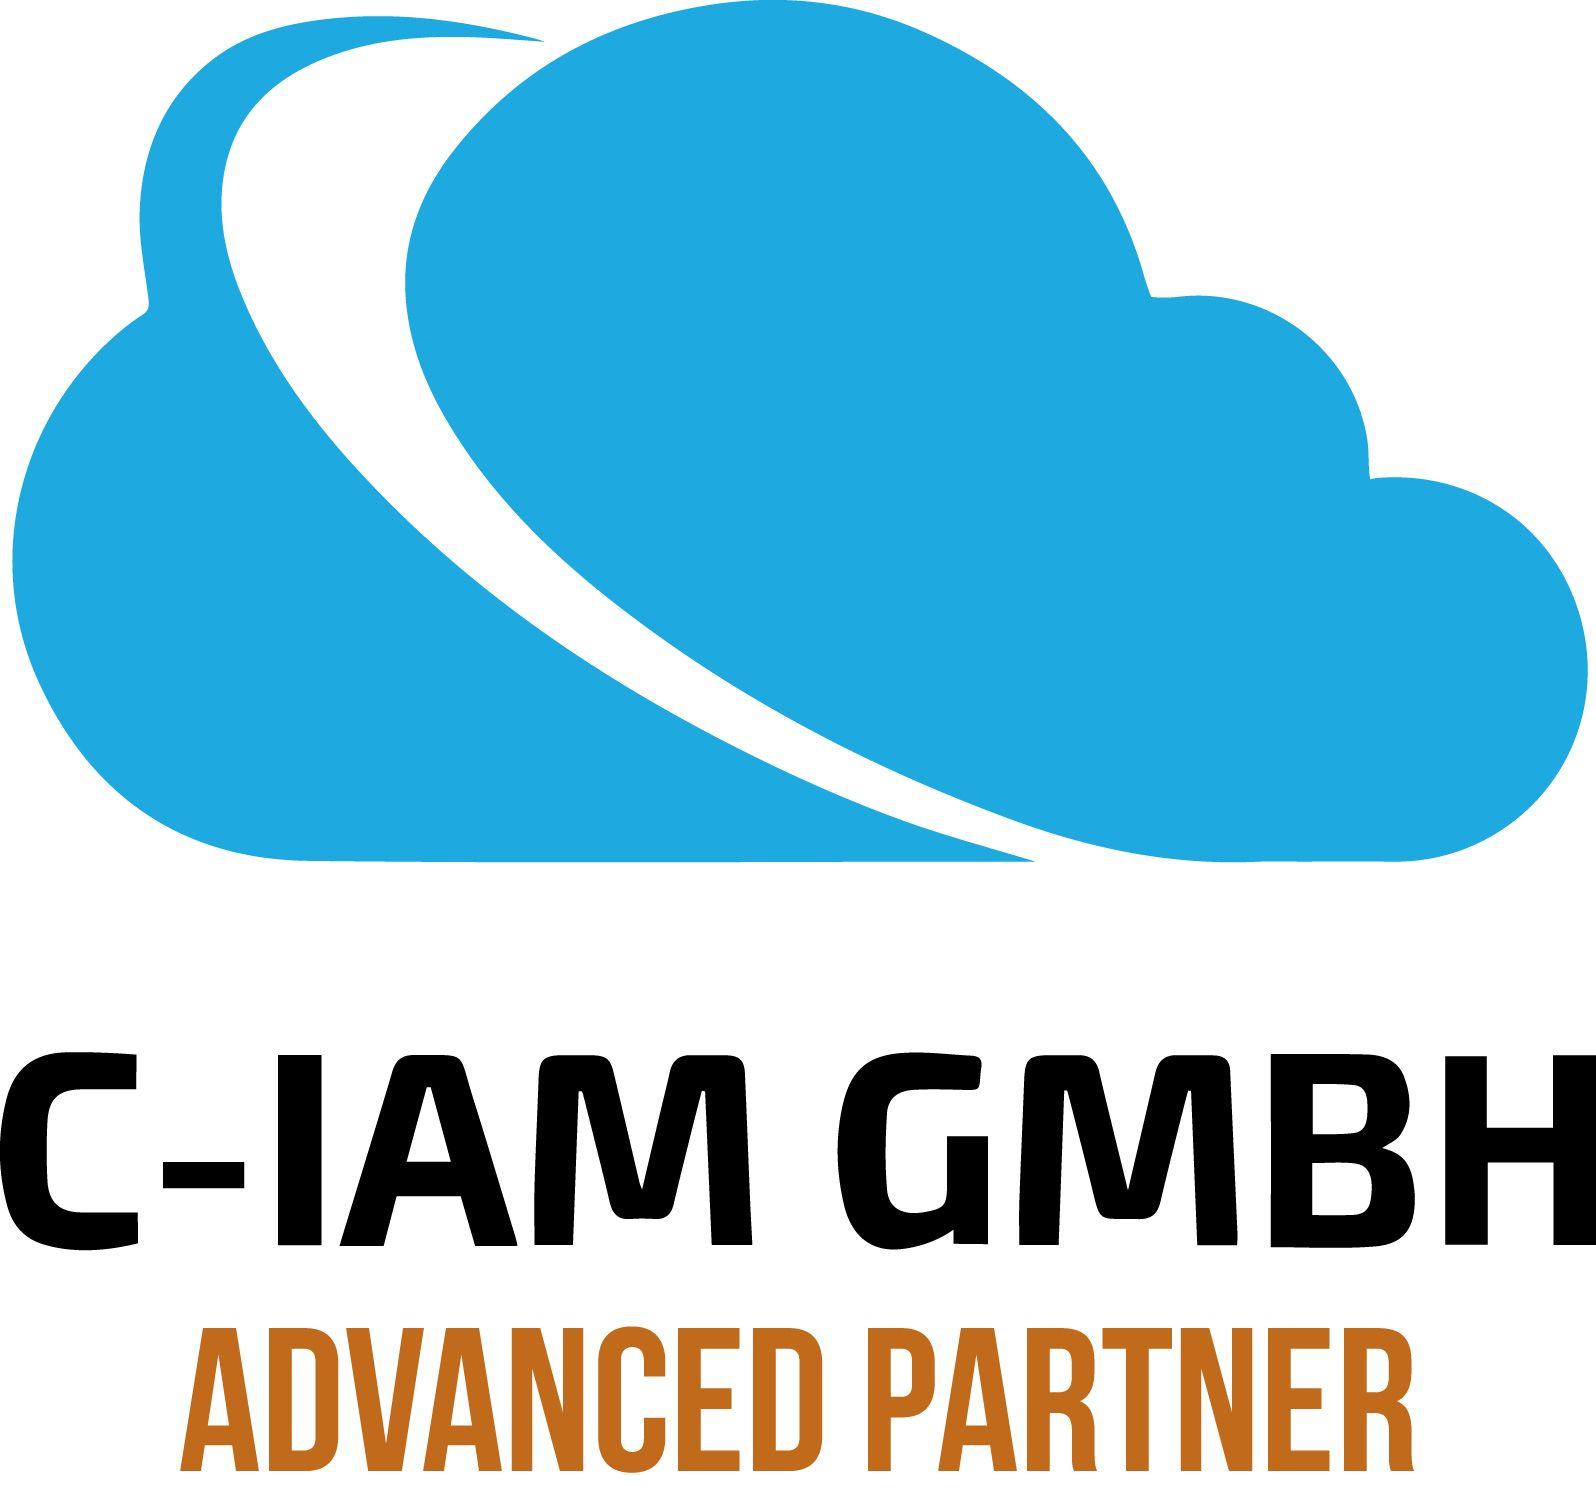 Iam Logo - C-IAM GmbH | Cloud Identity and Access Management as a Service